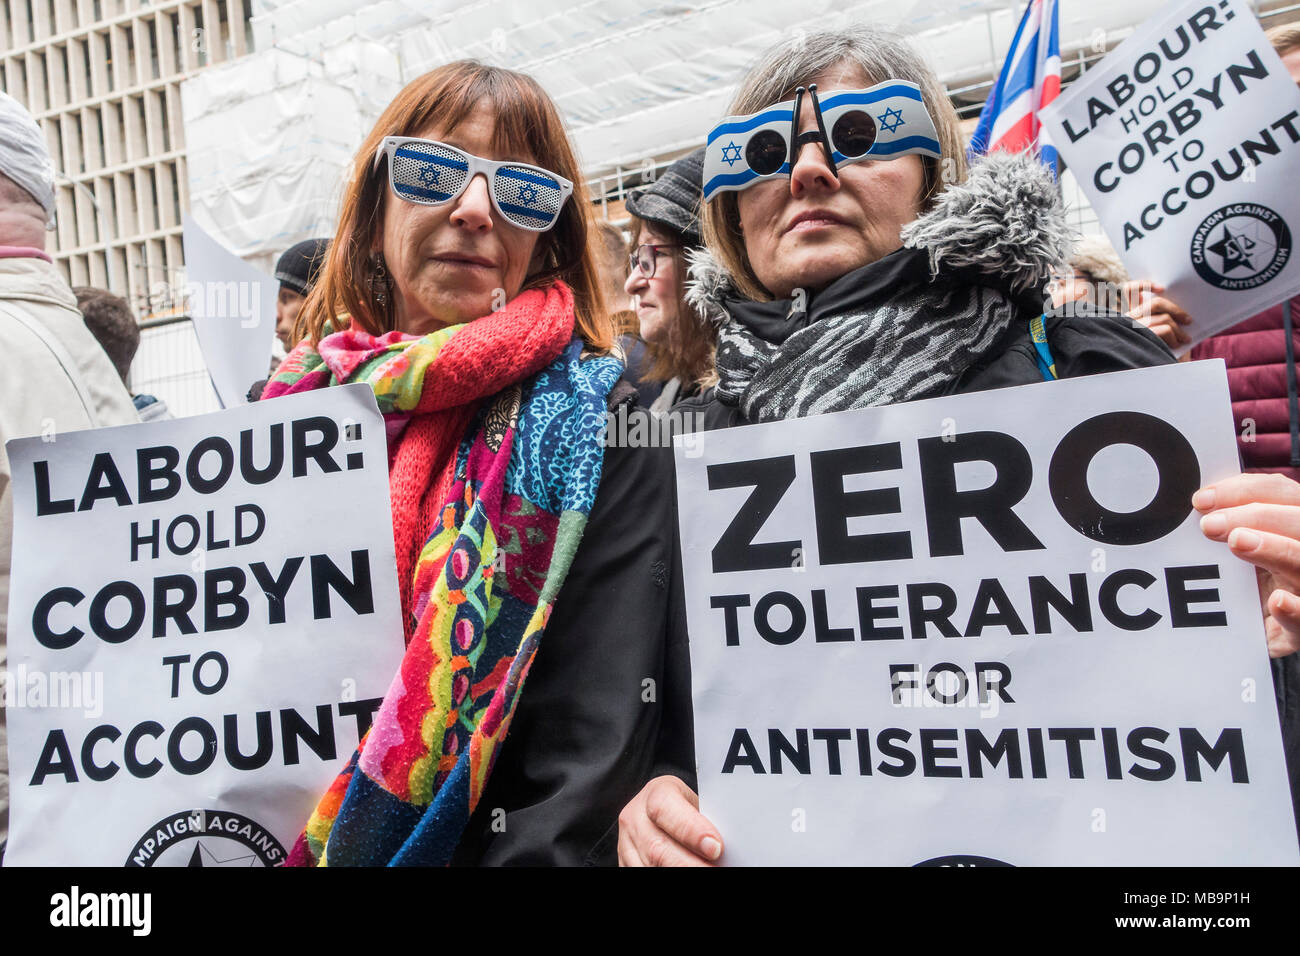 London, UK. 8th April, 2018. An antisemitism protest against Jeremy Corbyn, outside Labour Party offices in Victoria Street. Credit: Guy Bell/Alamy Live News Stock Photo